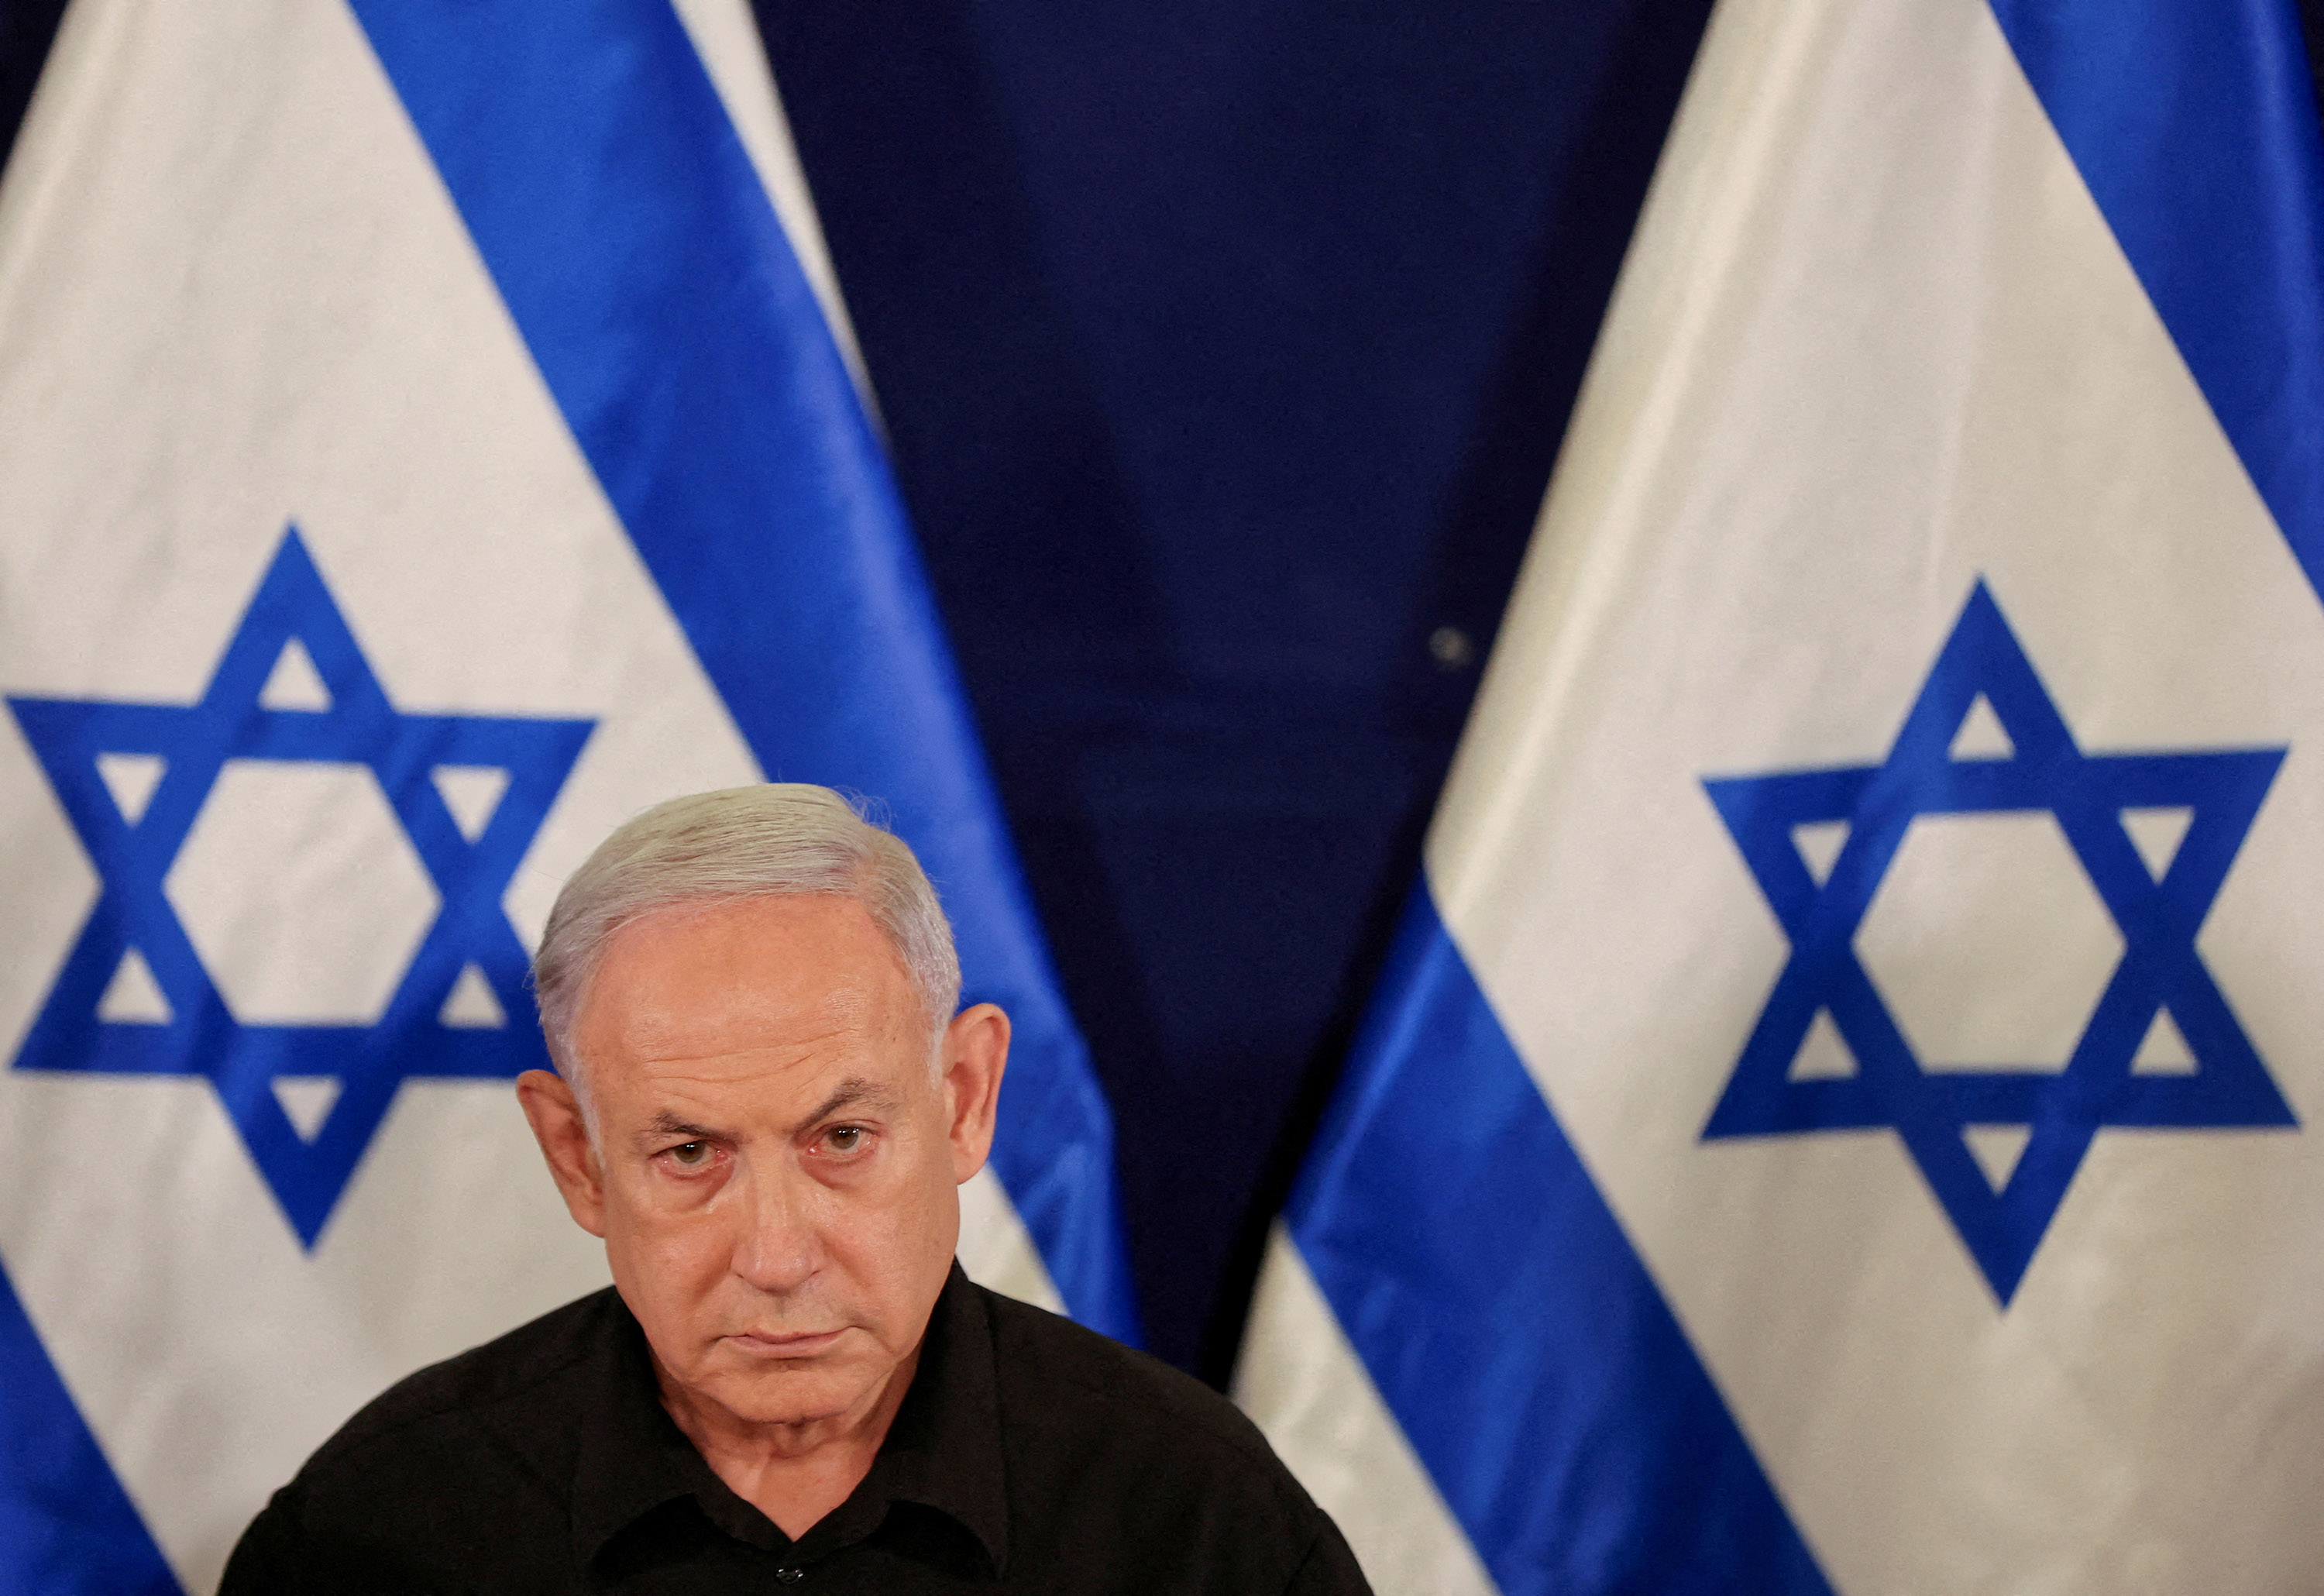 Israeli Prime Minister Benjamin Netanyahu is pictured during a press conference at the Kirya military base in Tel Aviv , Israel, on October 28